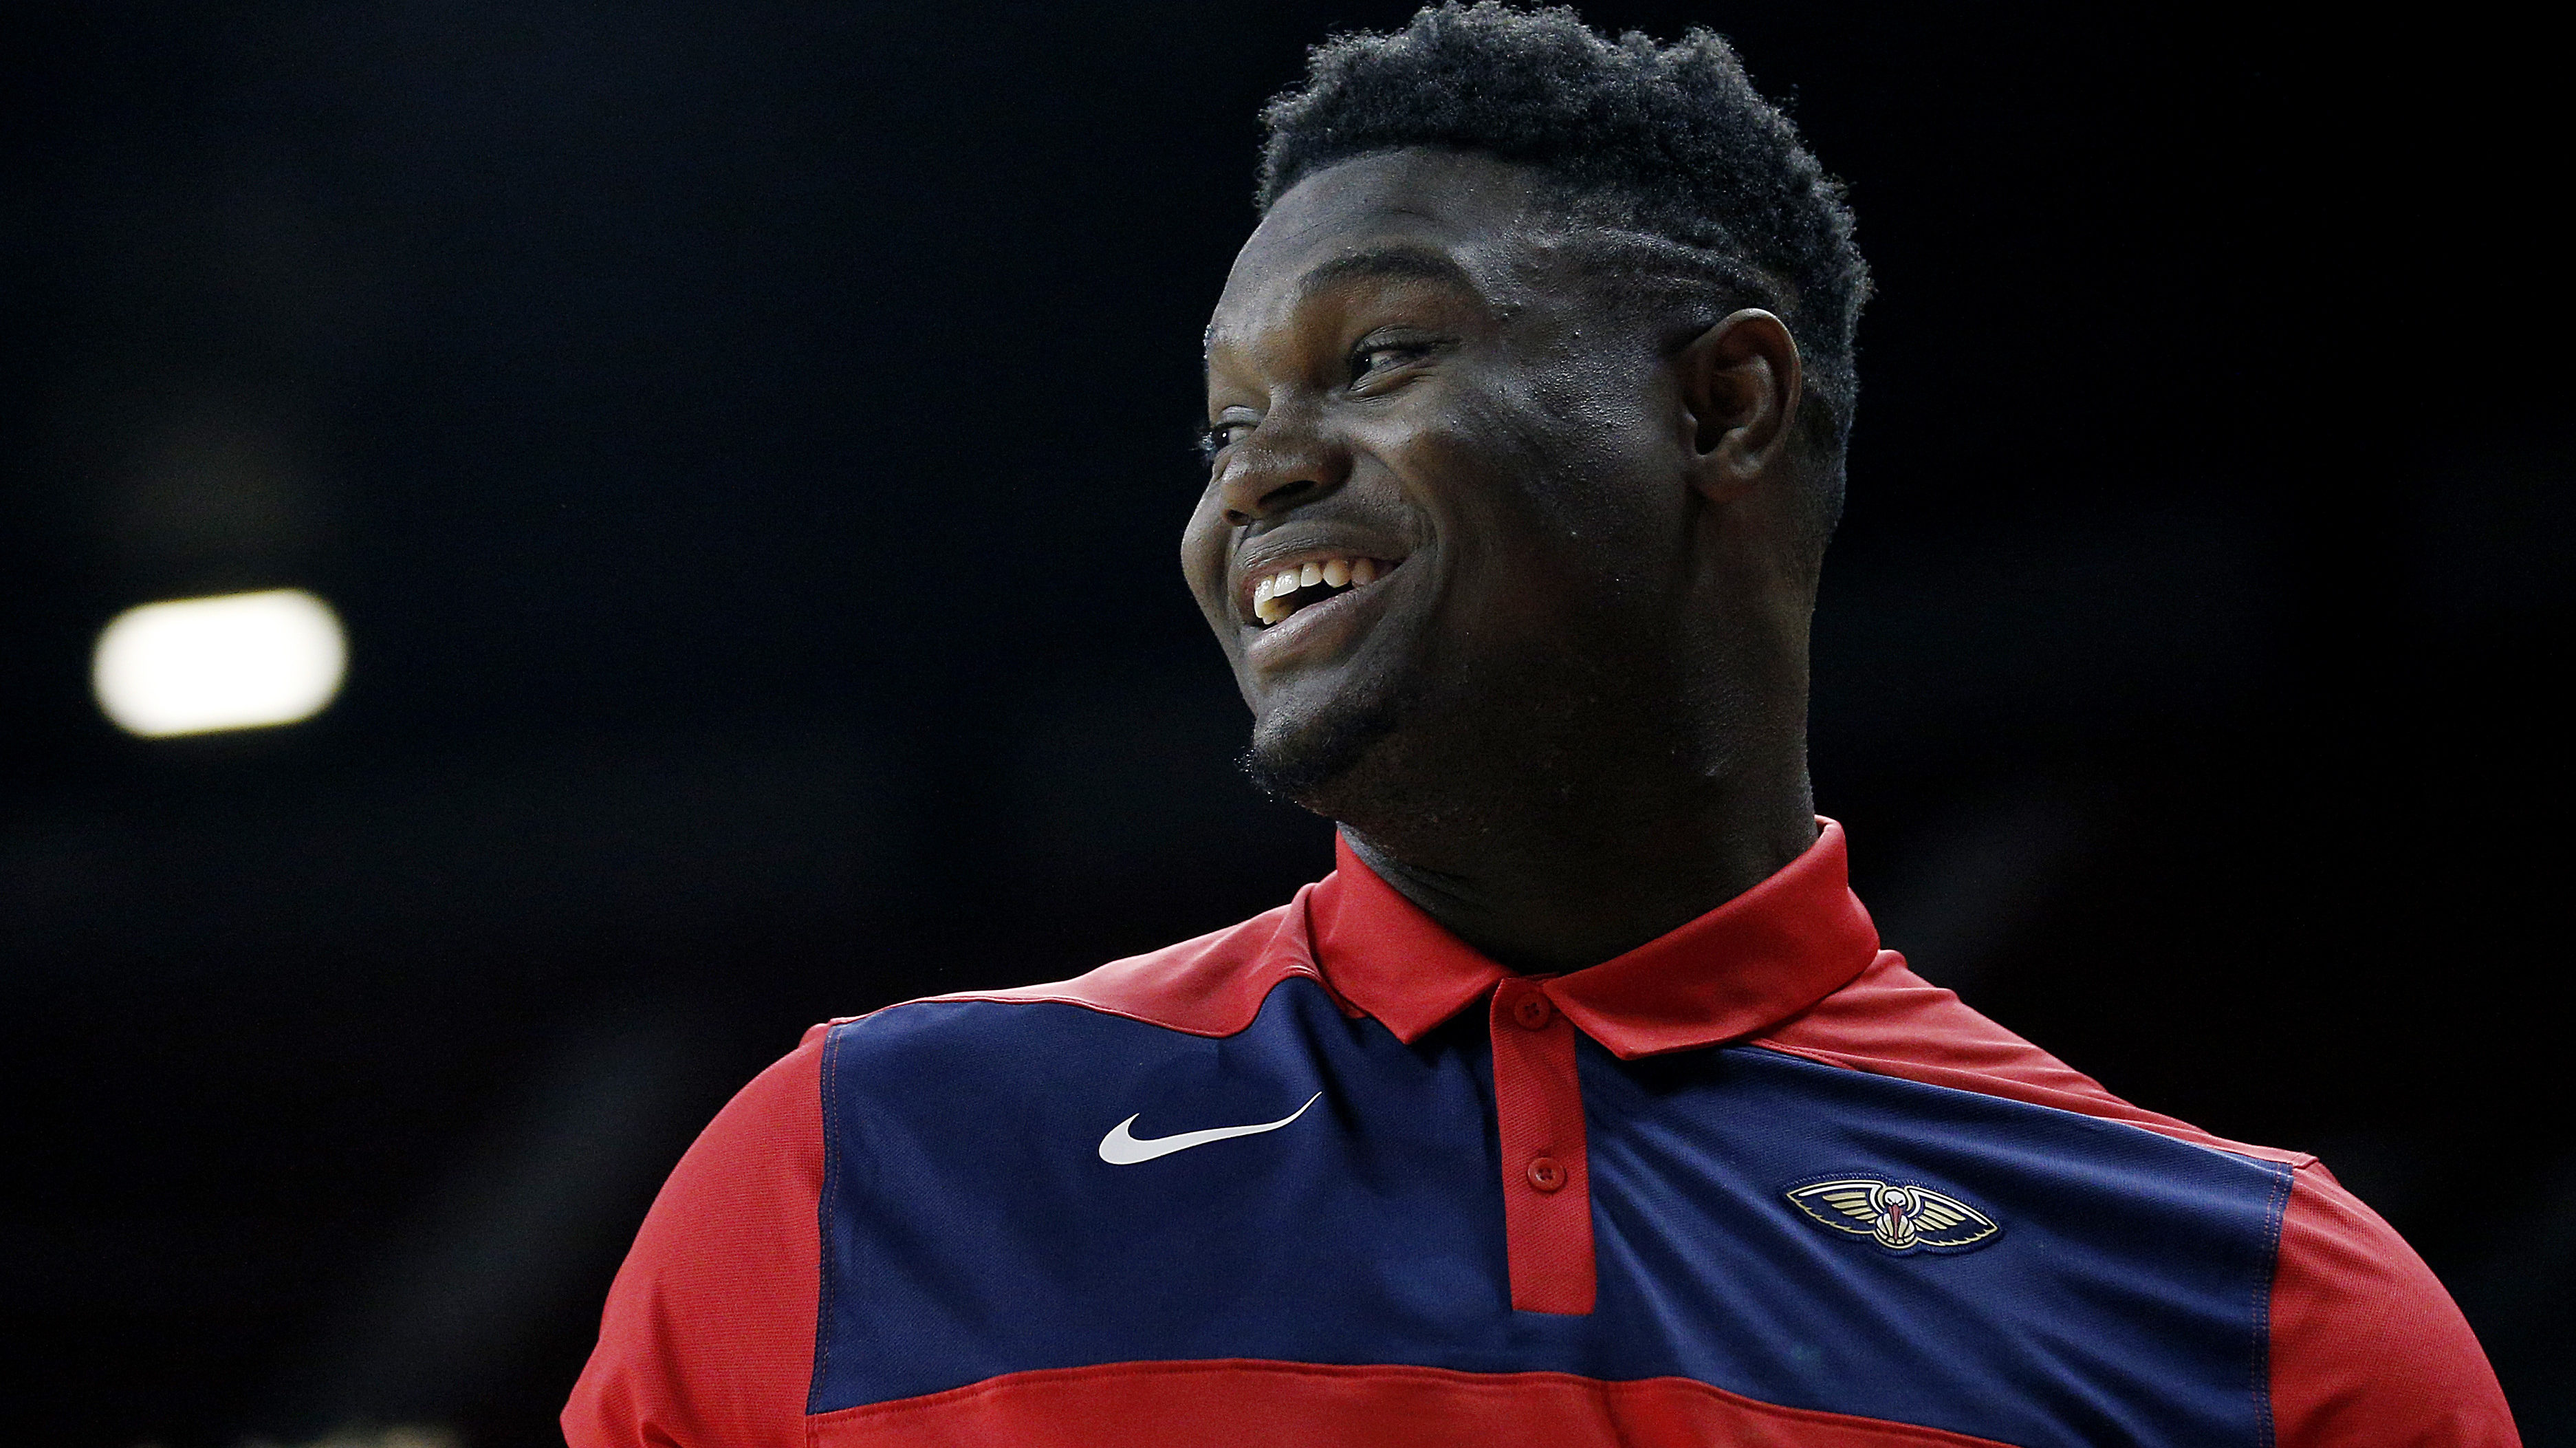 NBA: Zion Williamson Becomes New LeBron James Replacement ...